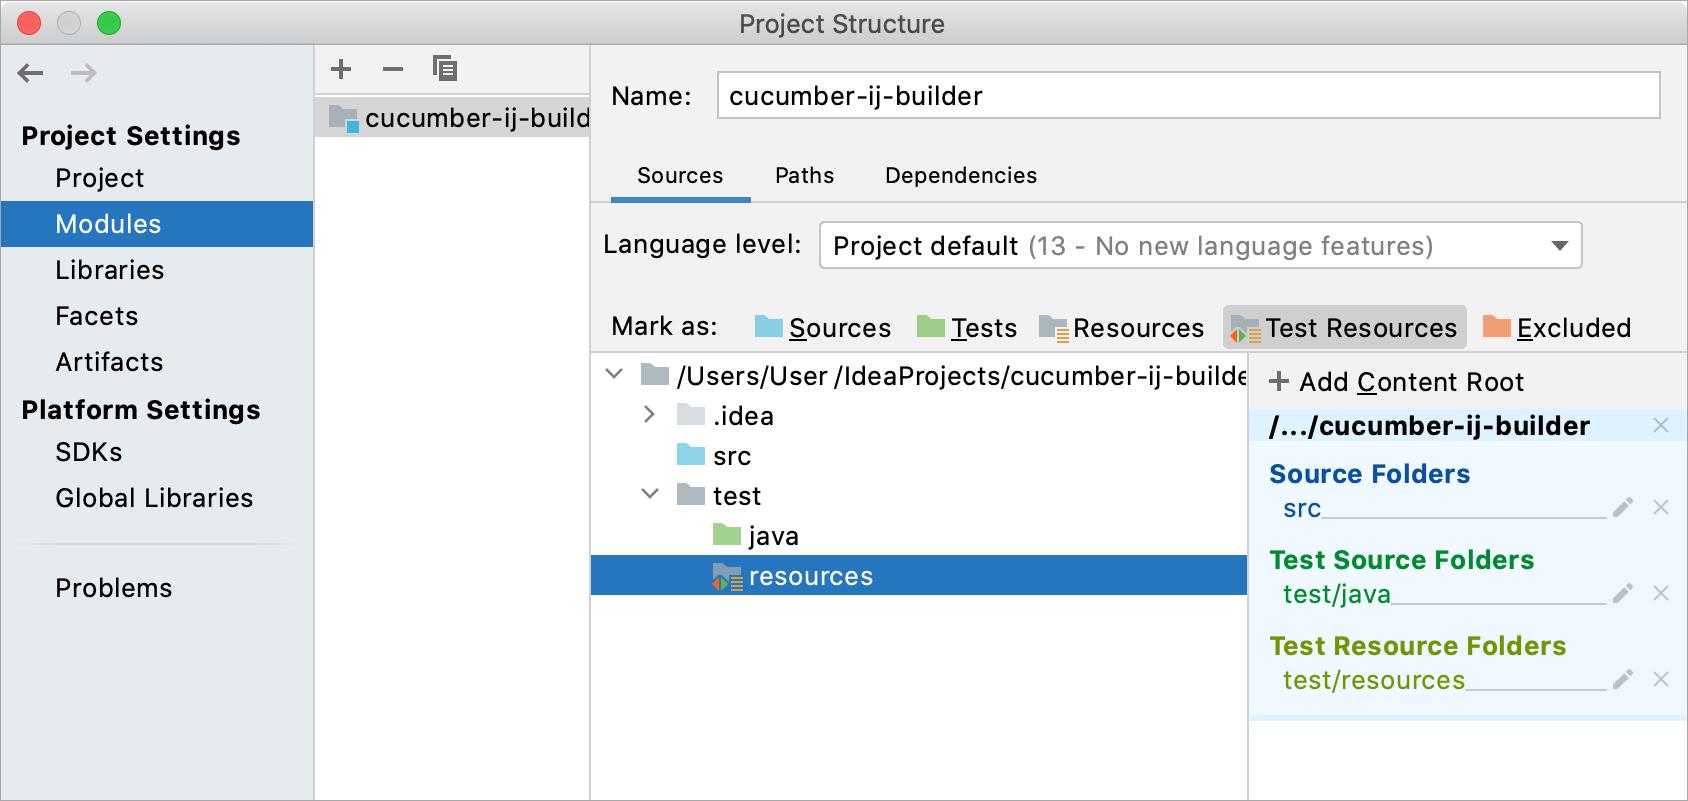 Test Resources Root created in the Project Strucuture dilaog